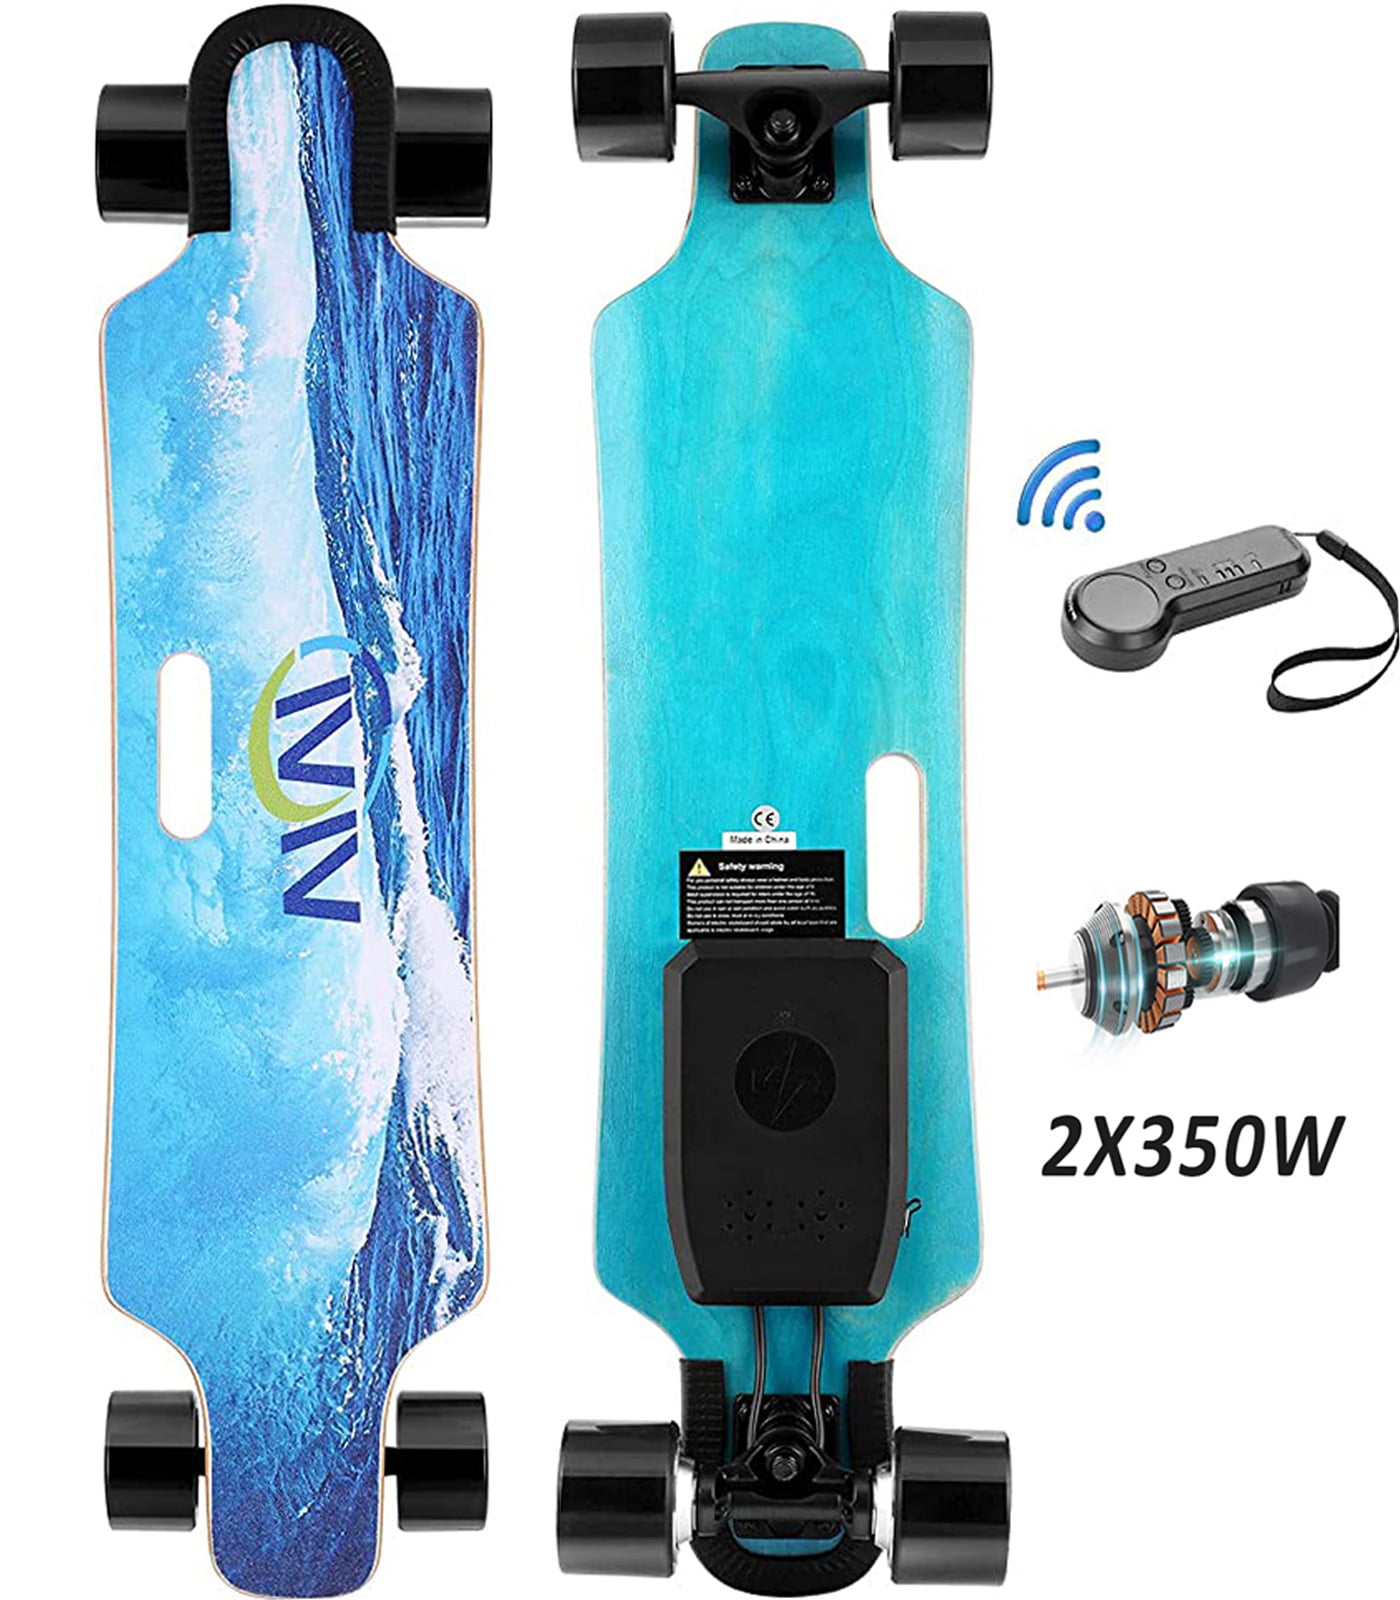 show original title Details about   350W Electric Skateboard Longboard E-Scooter Board with Remote Control Z C 04 J 03 